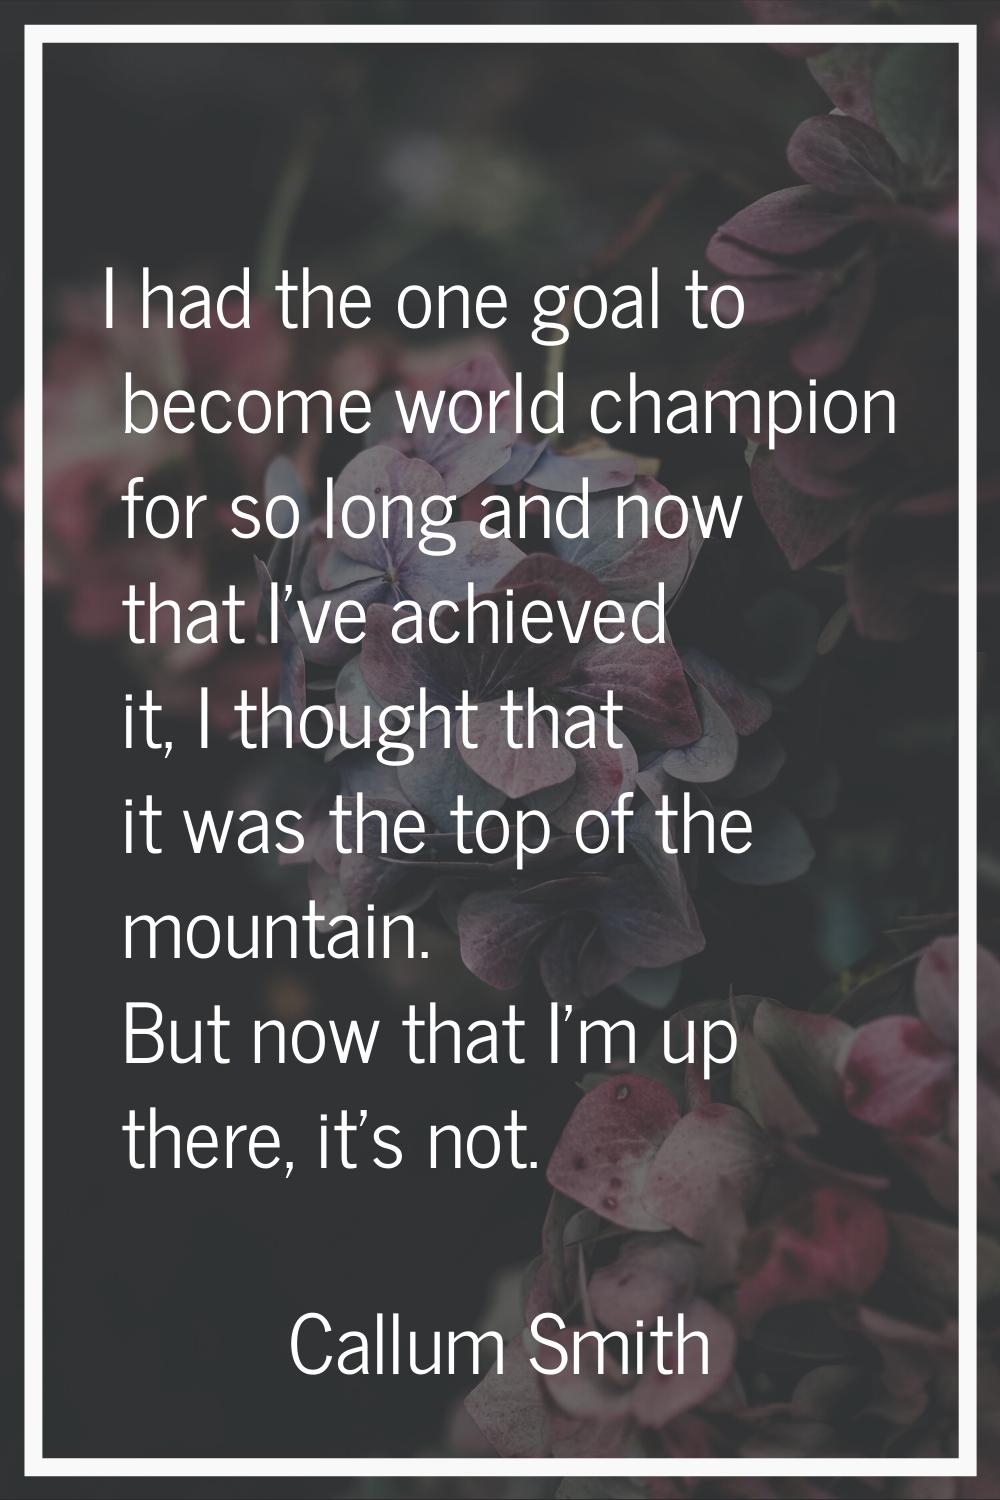 I had the one goal to become world champion for so long and now that I've achieved it, I thought th